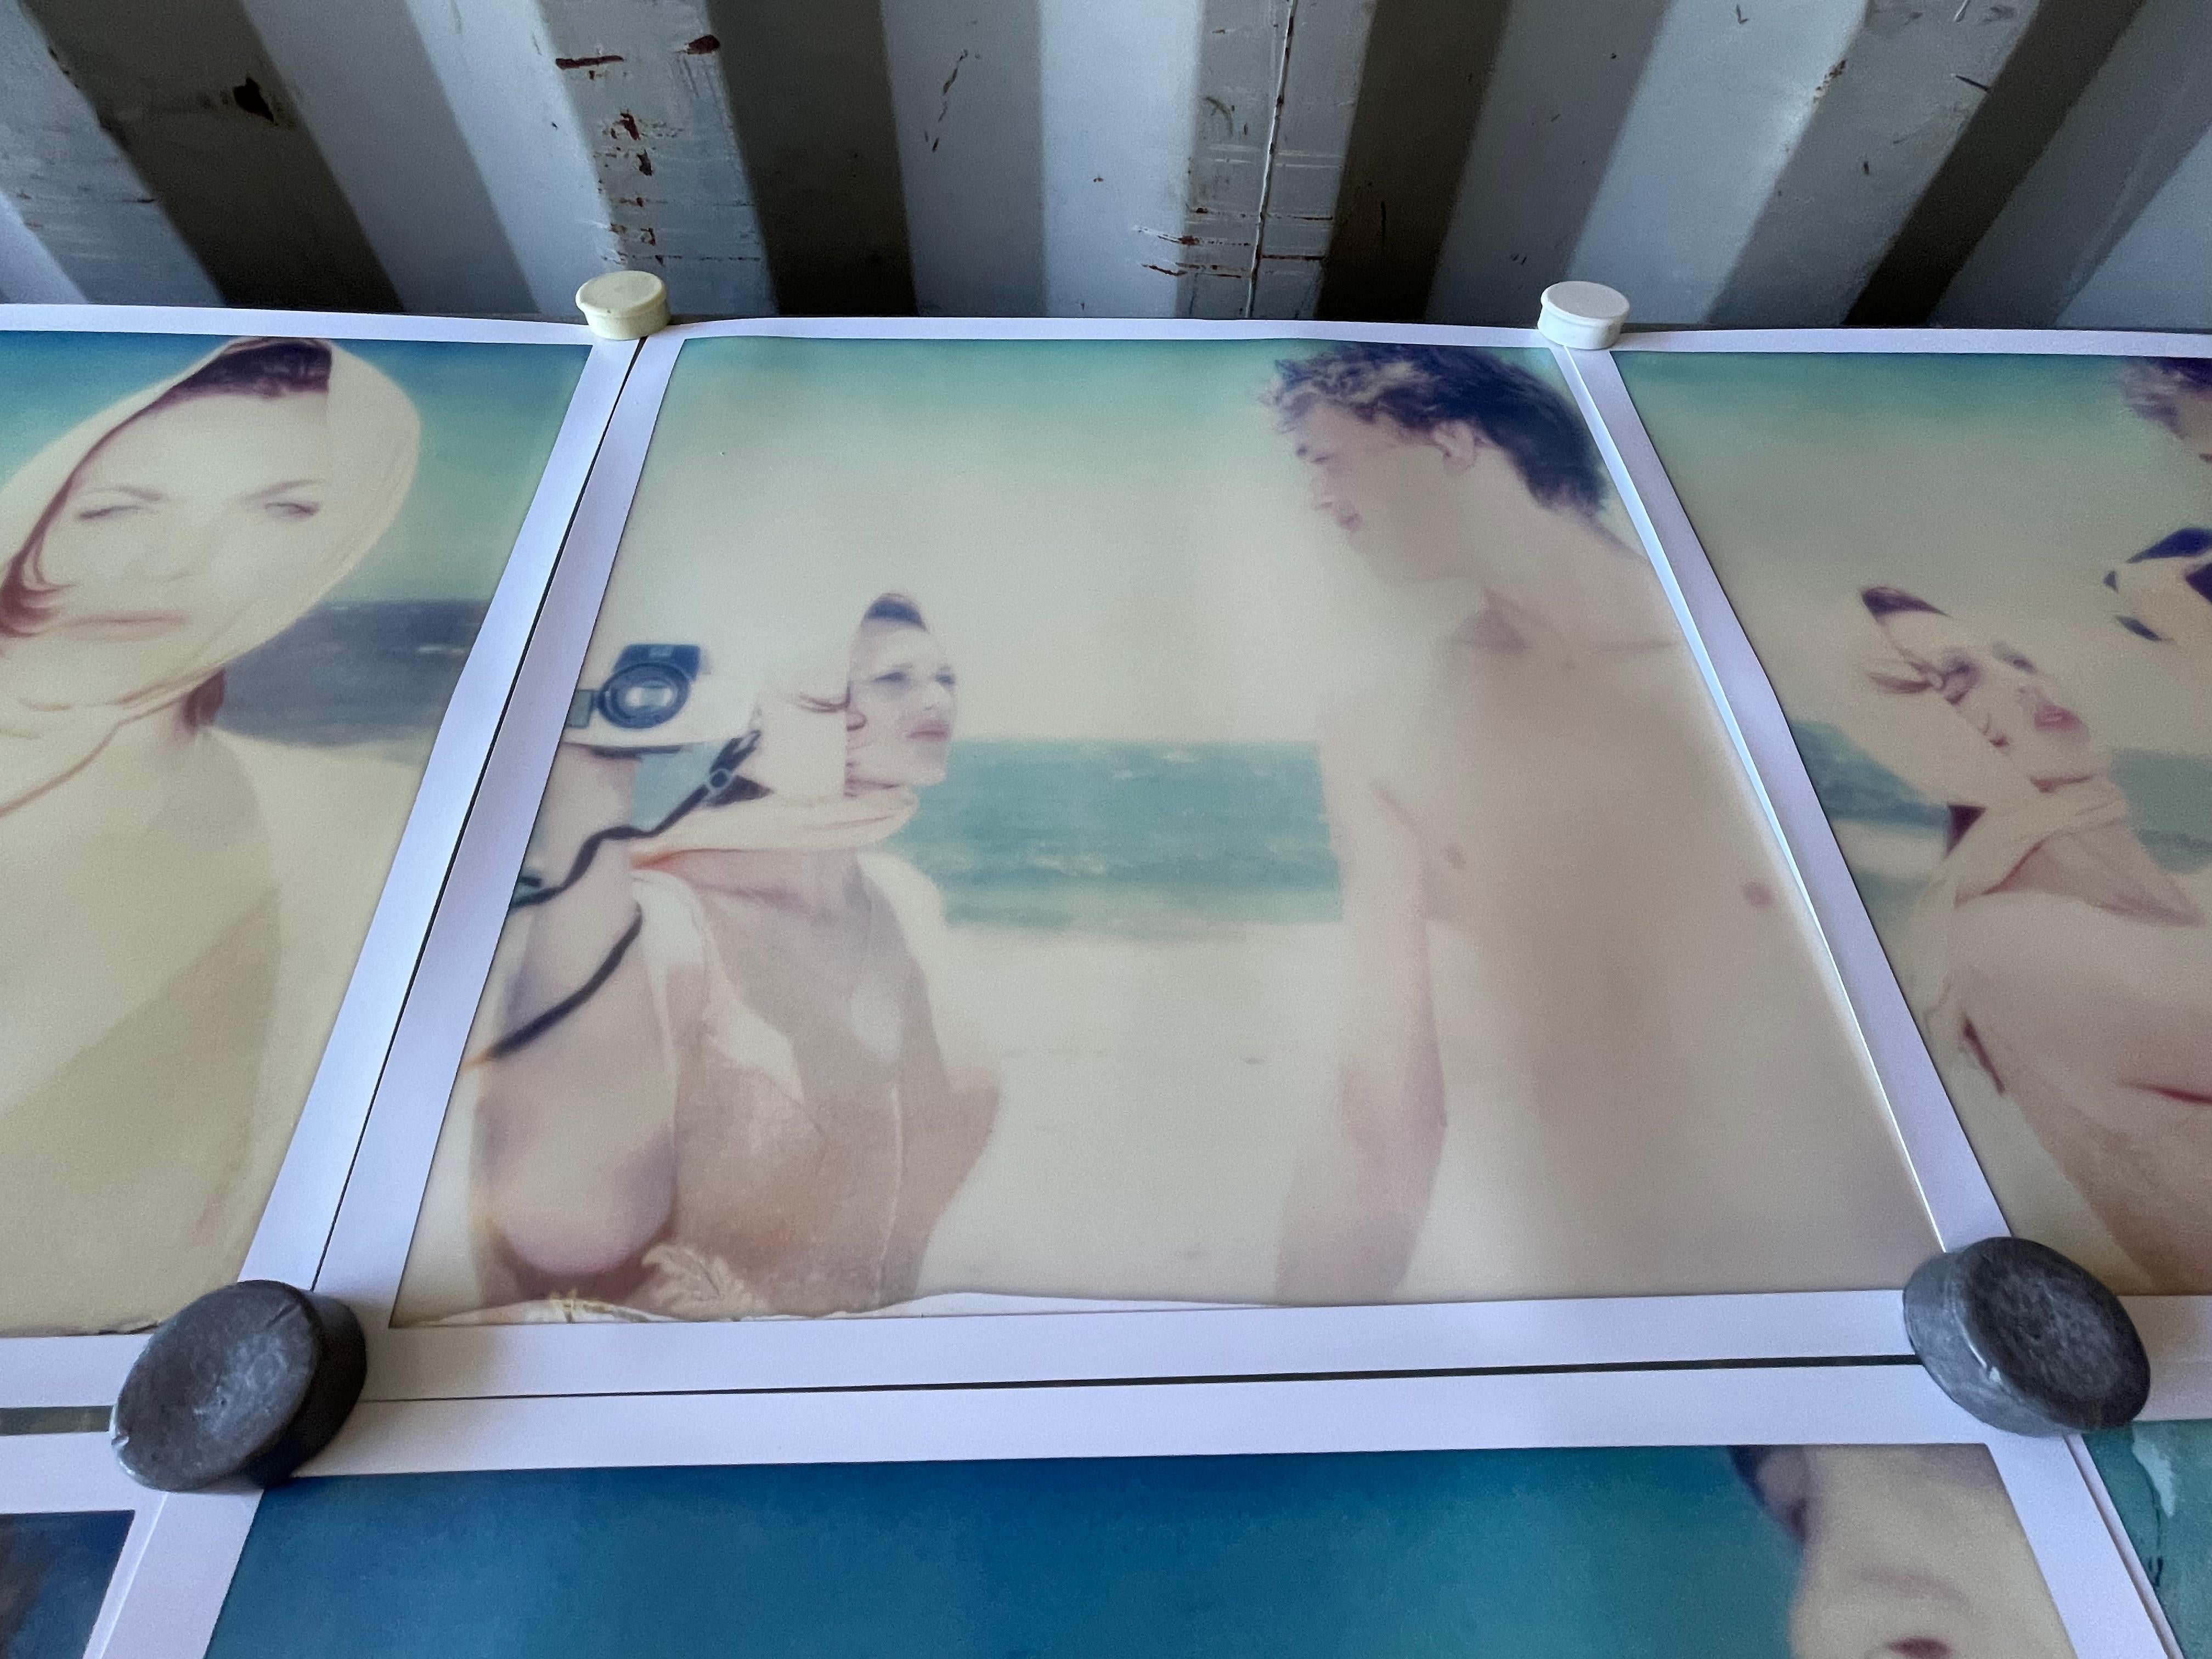 The Diva and the Boy (Beachshoot) - 2005

Edition of 10 plus 2 artist Proofs. 
48x46cm each, installed 155x151cm. 
9 archival C-Prints, based on the 9 Polaroids. 
Certificate and Signature label, 
artist Inventory # 1461. 
Not mounted.


The works